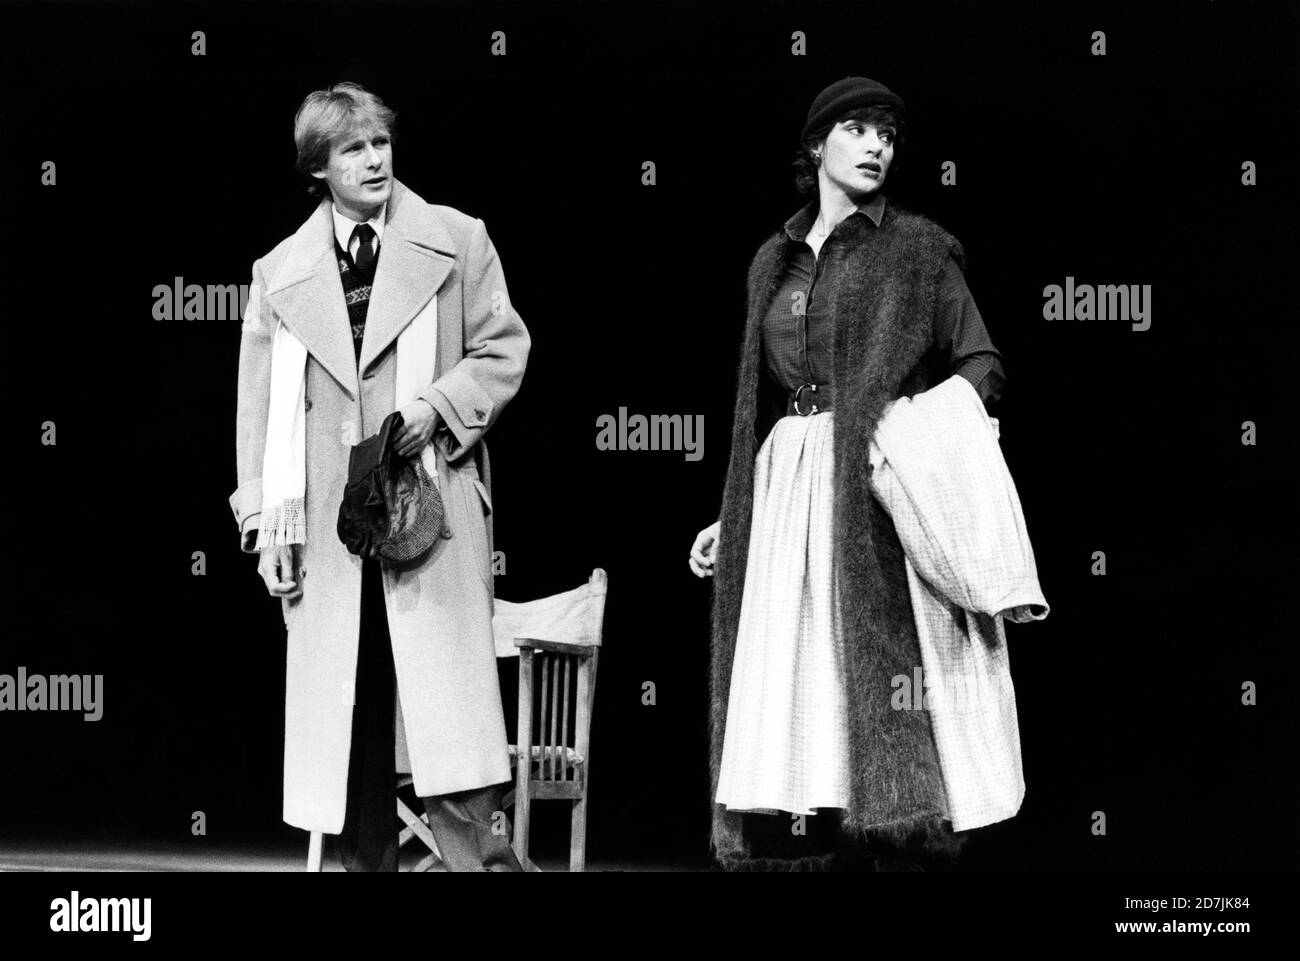 Bill Nighy (Stephen Andrews), Diana Quick (Peggy Whitton) in A MAP OF THE WORLD written & directed by David Hare at the Lyttelton Theatre, National Theatre (NT), London SE1  21/01/1983  design: Hayden Griffin  lighting: Rory Dempster Stock Photo